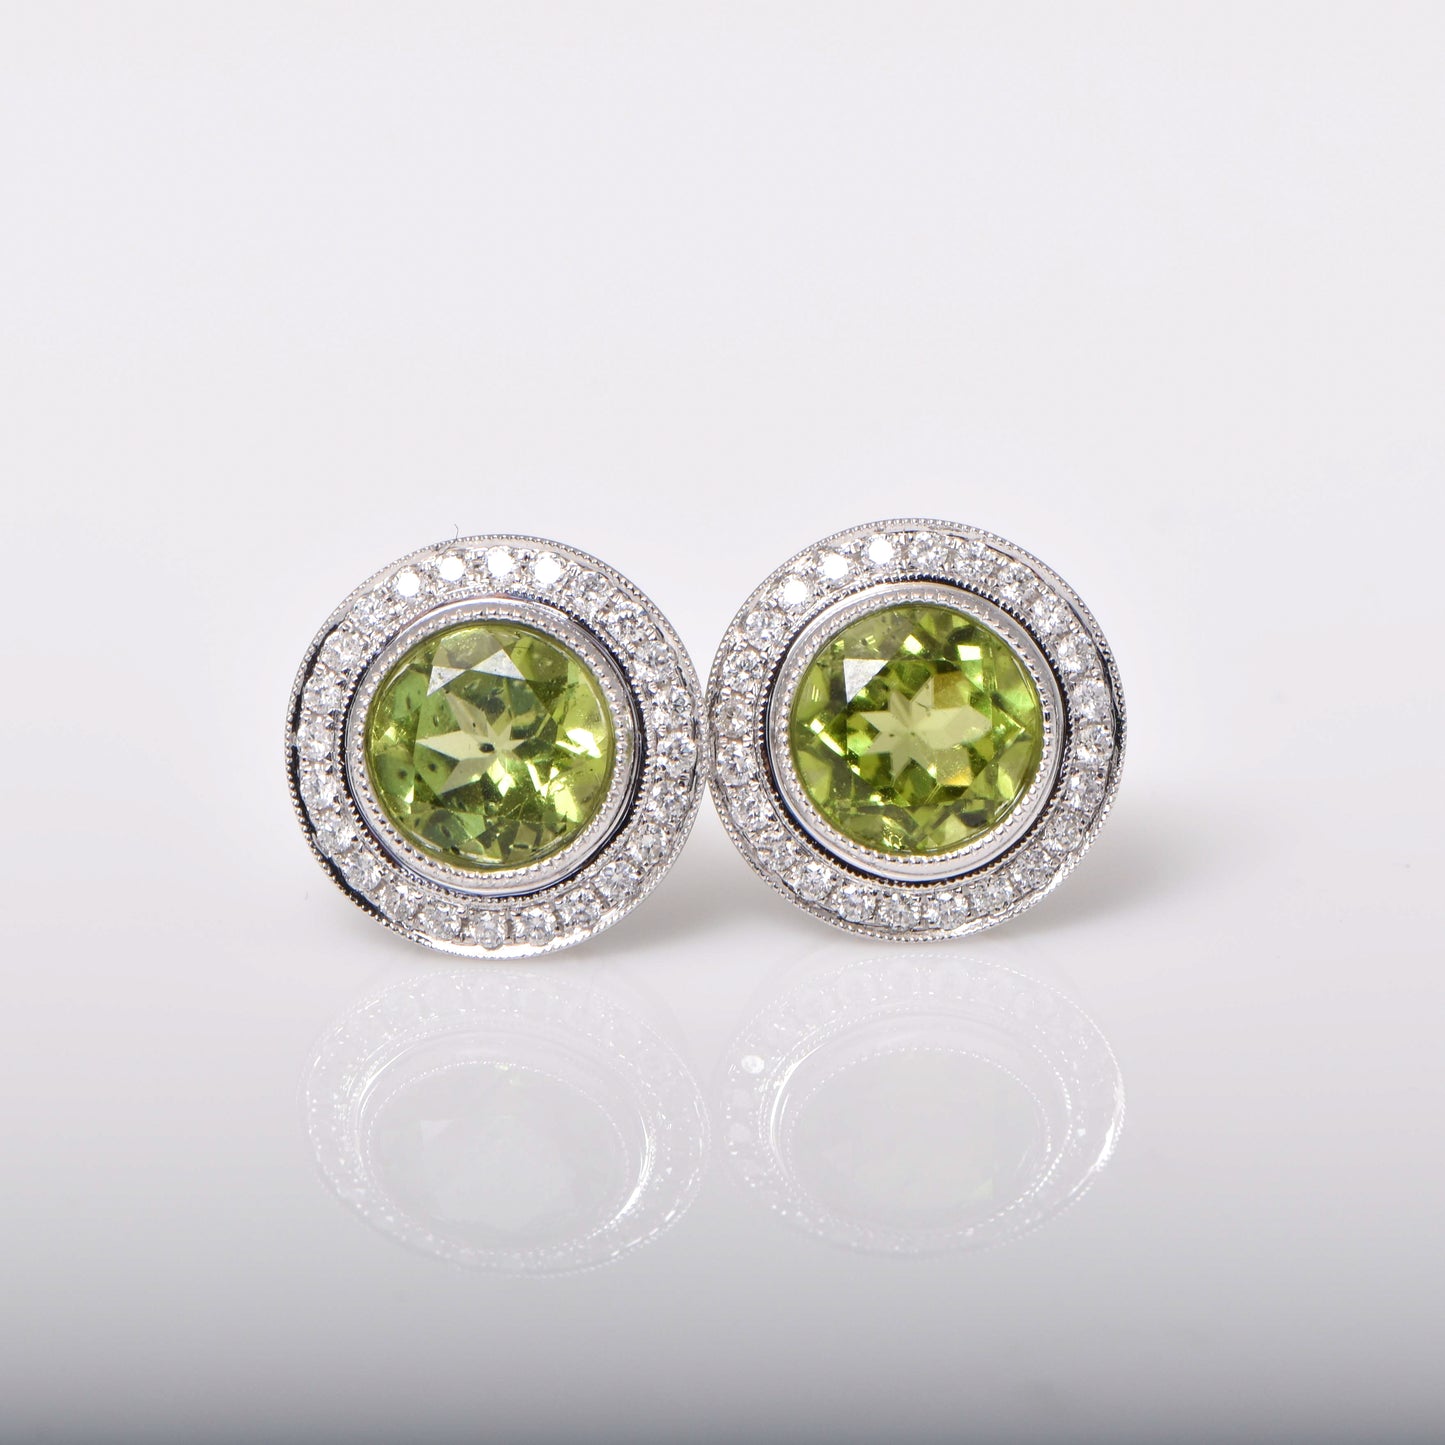 4.73ct Peridot and Diamond Earrings in 18ct White Gold